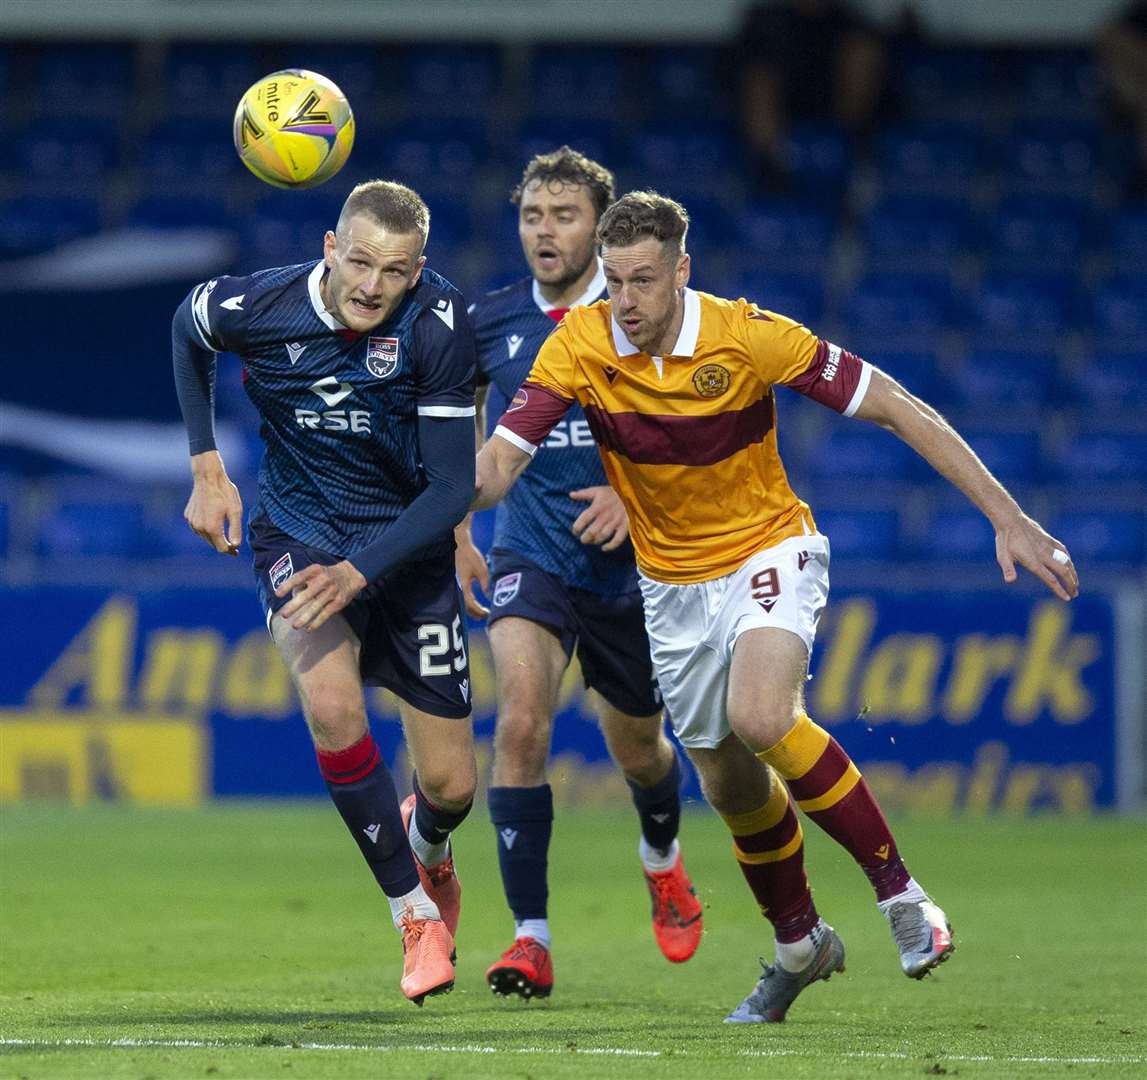 Picture - Ken Macpherson, Inverness. Ross County(1) v Motherwell(0). 03.08.20. Ross County's Coll Donaldson in a race for the ball with Motherwell's Jordan White, his former ICT colleague.